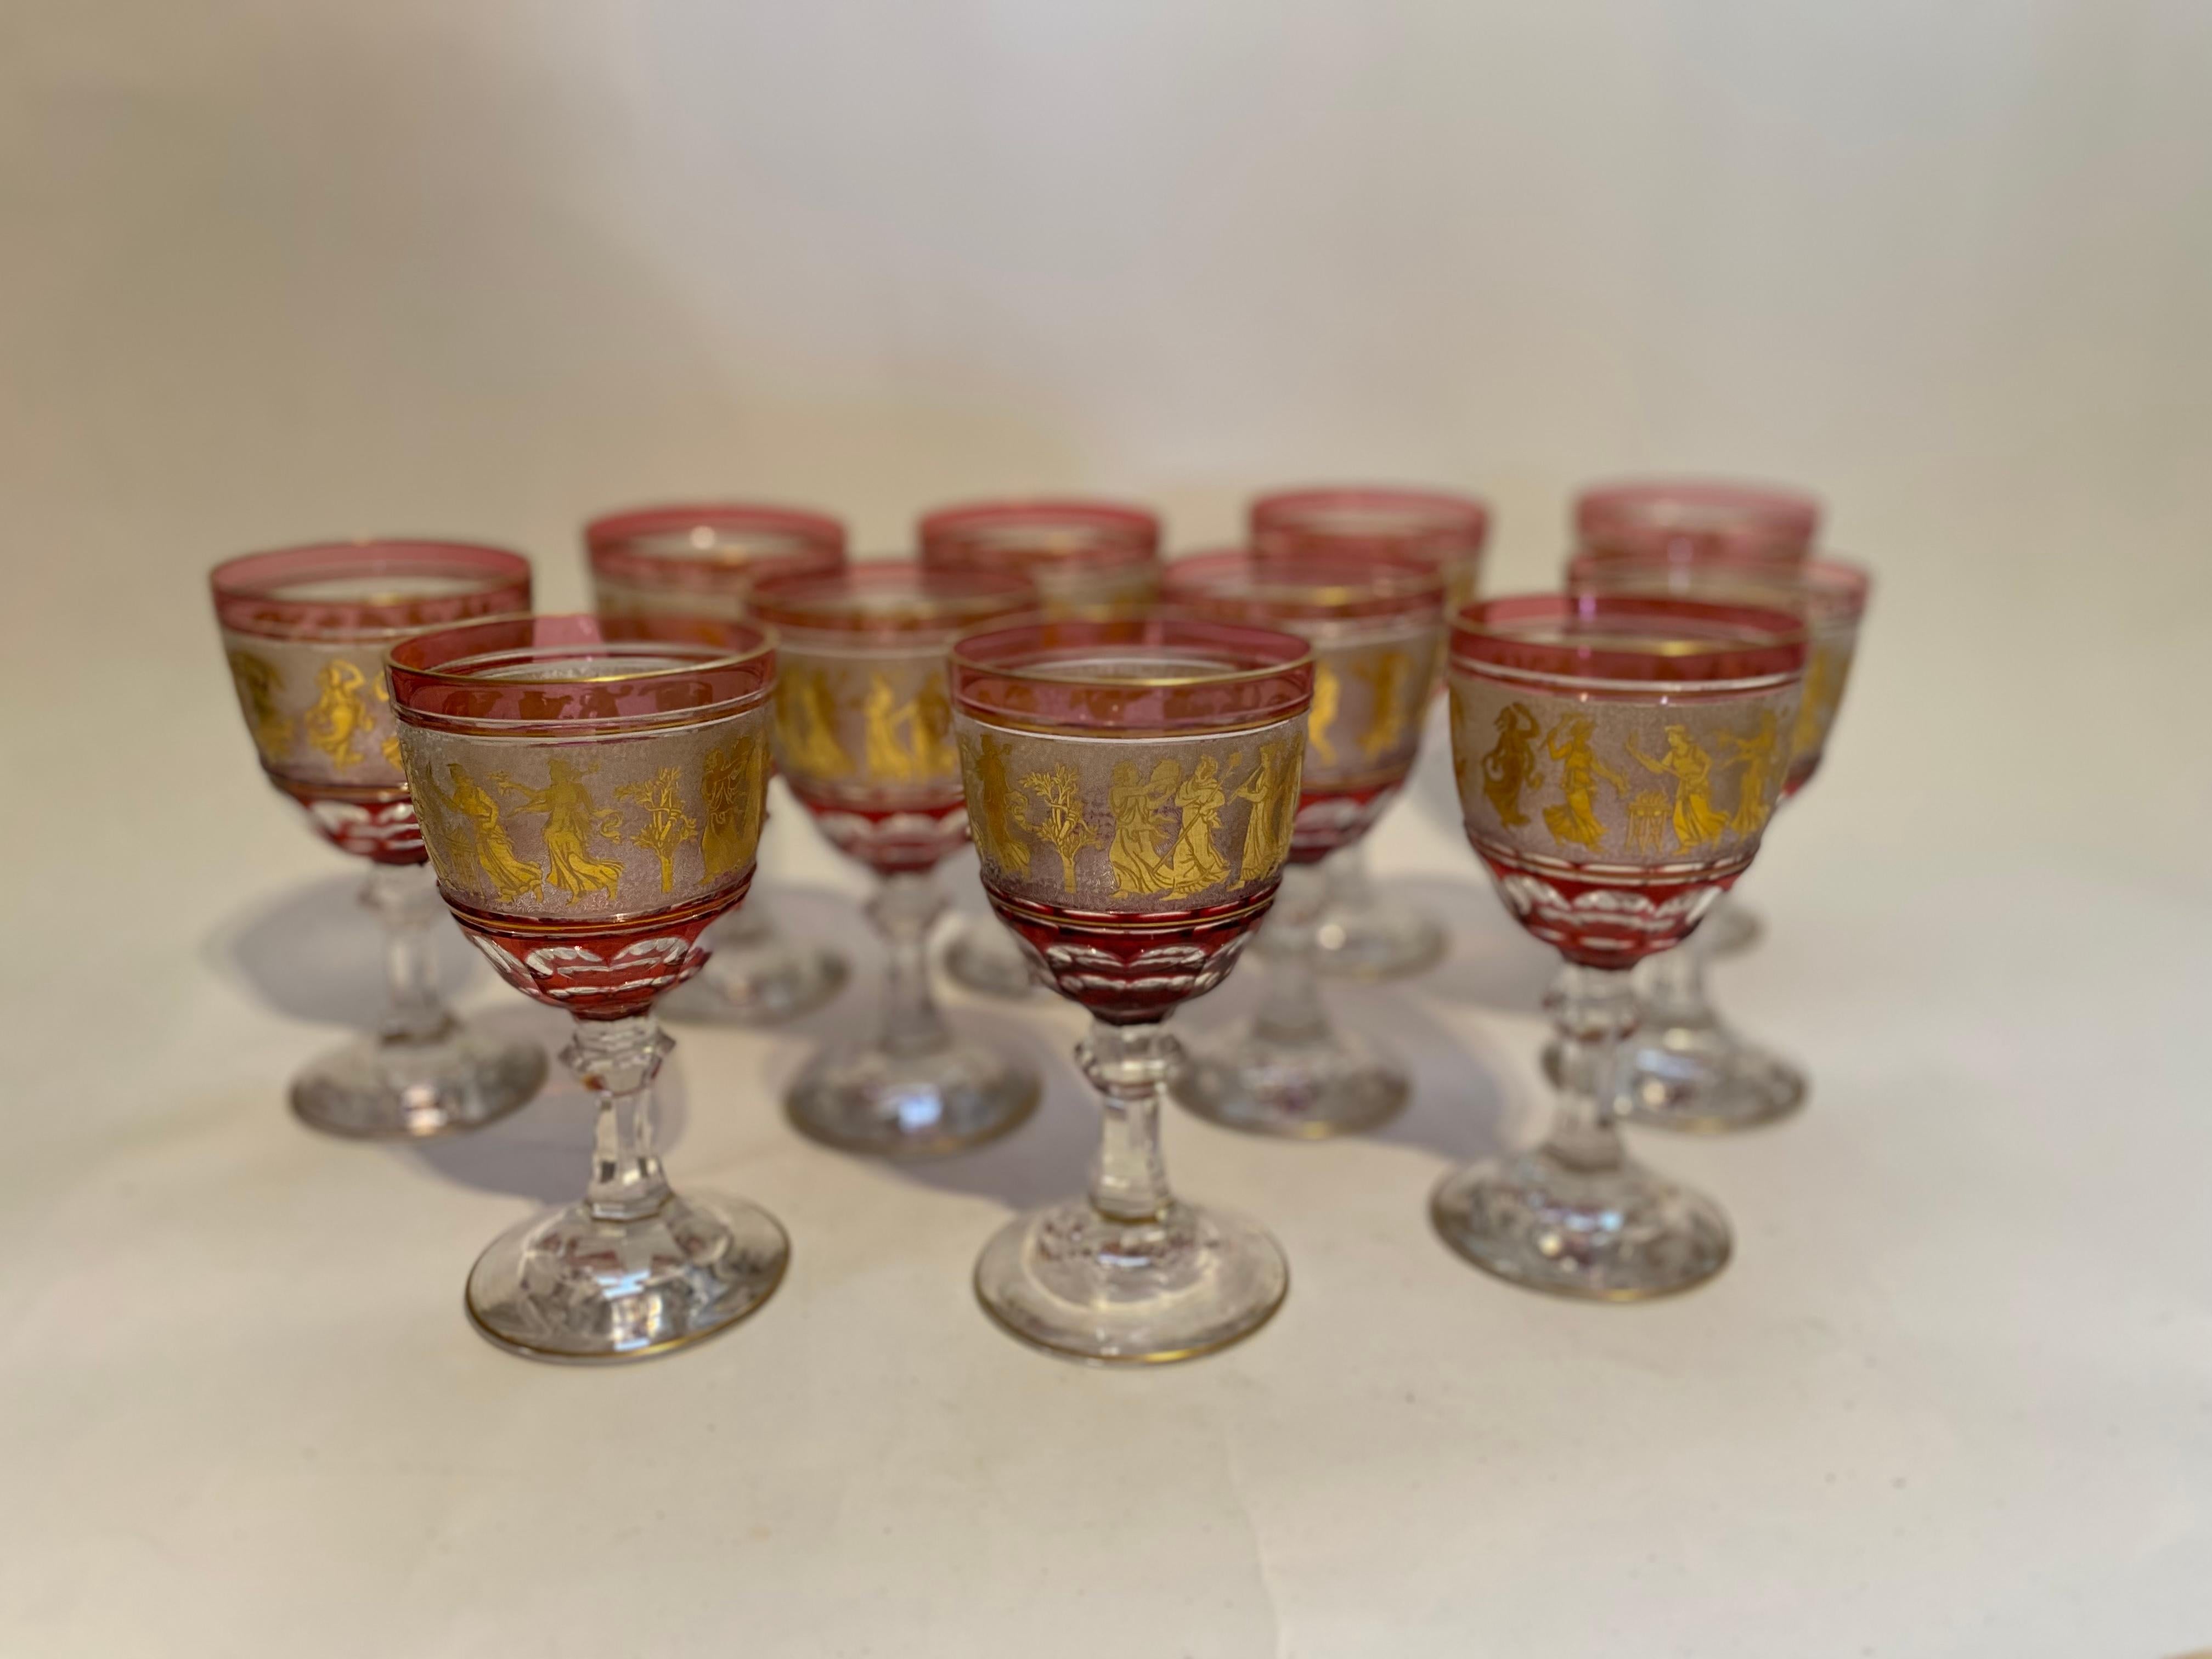 A gorgeous elegant set of 11 heavy blown and ruby cased crystal goblets by the re known firm of Val Saint Lambert. One of their signature patterns, these lovely pieces feature Greco Roman 24 Karat Gilt Figures on an acid cut back ground and are